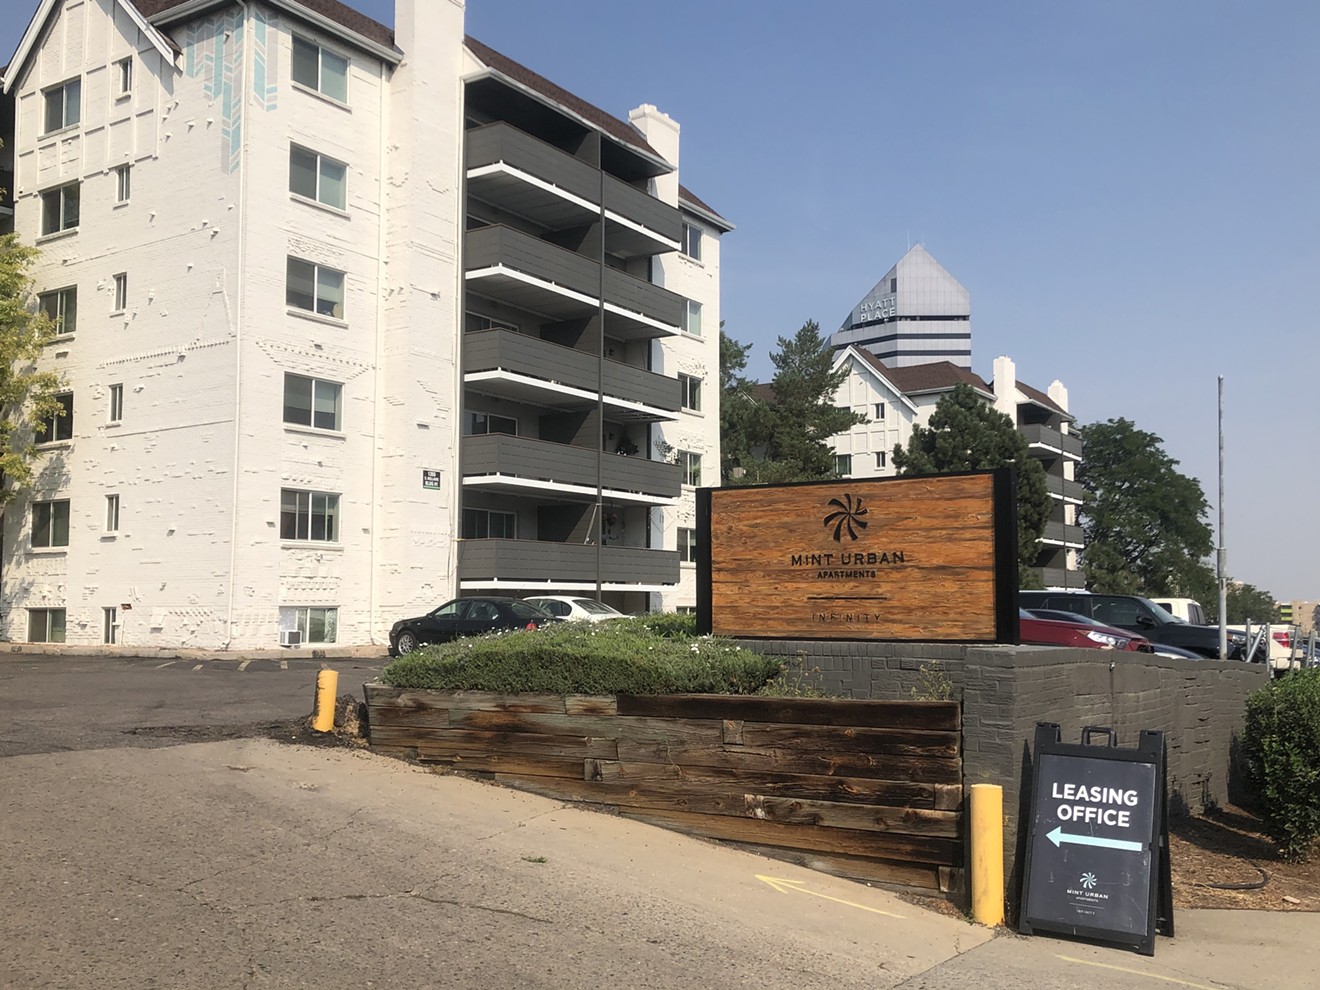 Tenants at the Mint Urban Infinity apartment complex on 1261 South Bellaire Street filed a class-action lawsuit after months of being ignored.